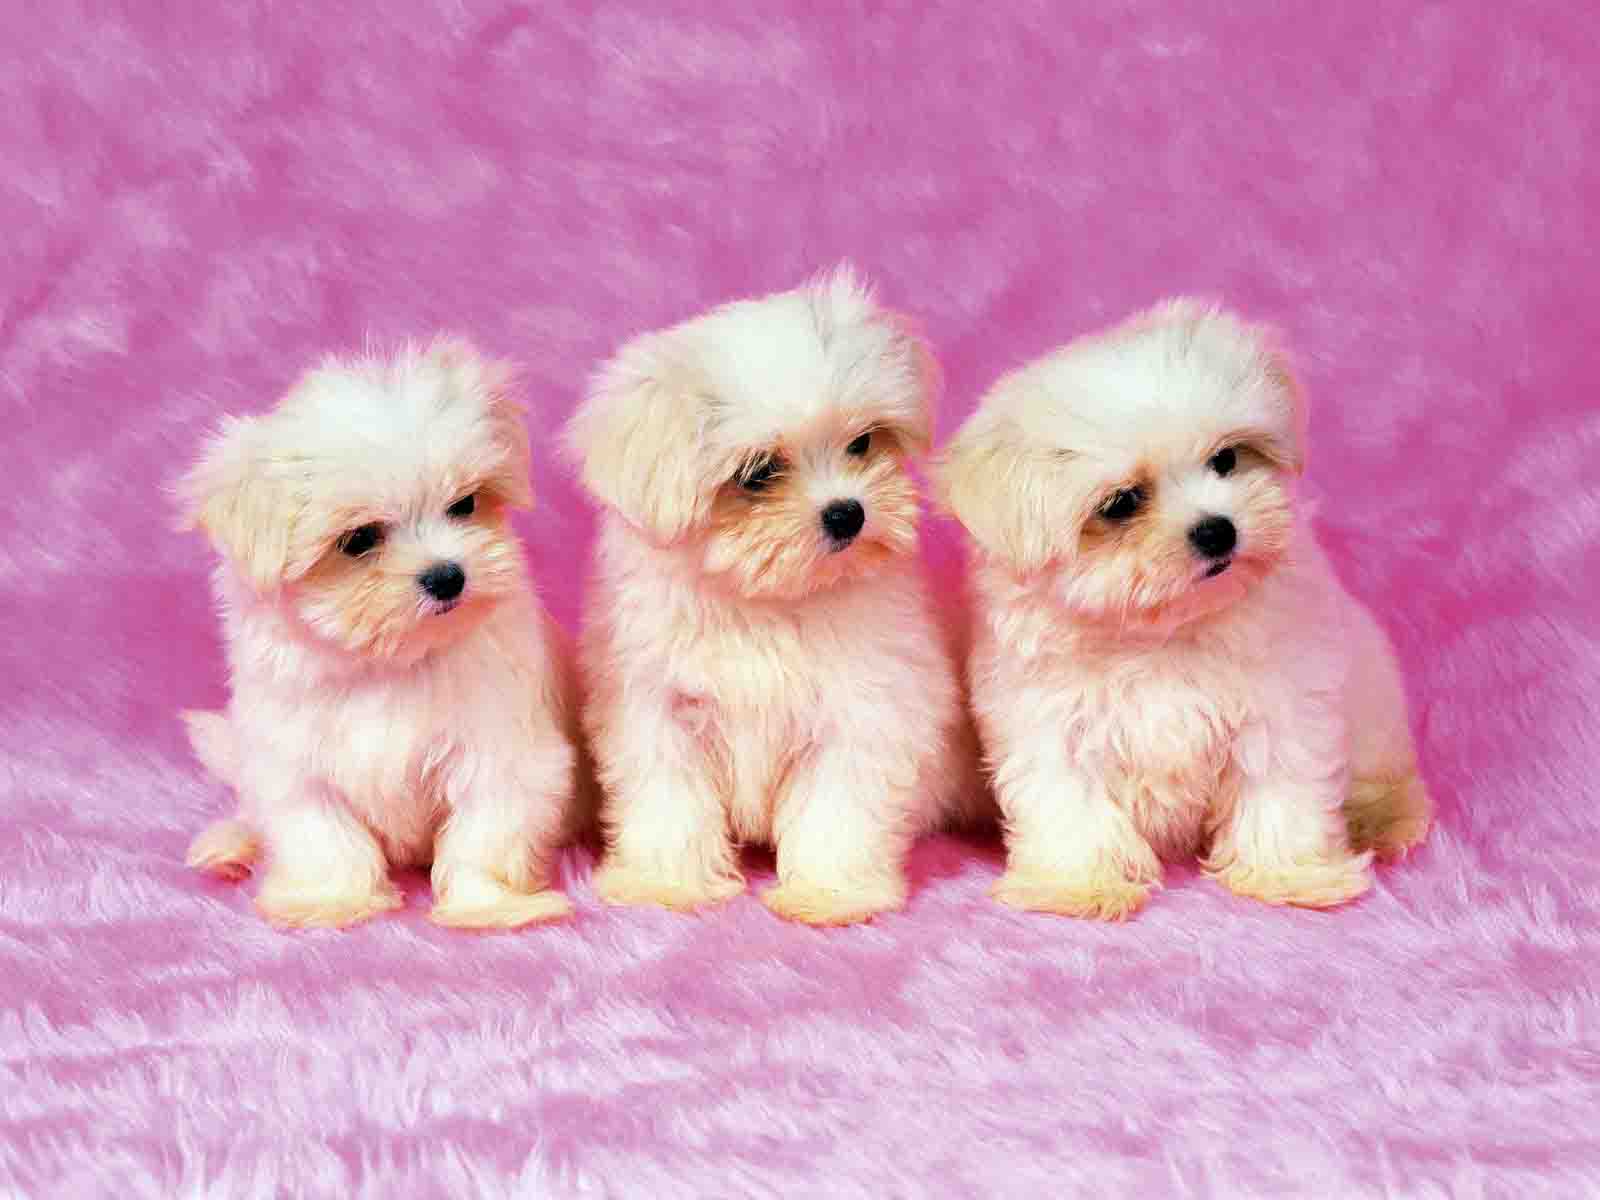 HD WALLPAPERS CUTE PUPPY HD WALLPAPERS